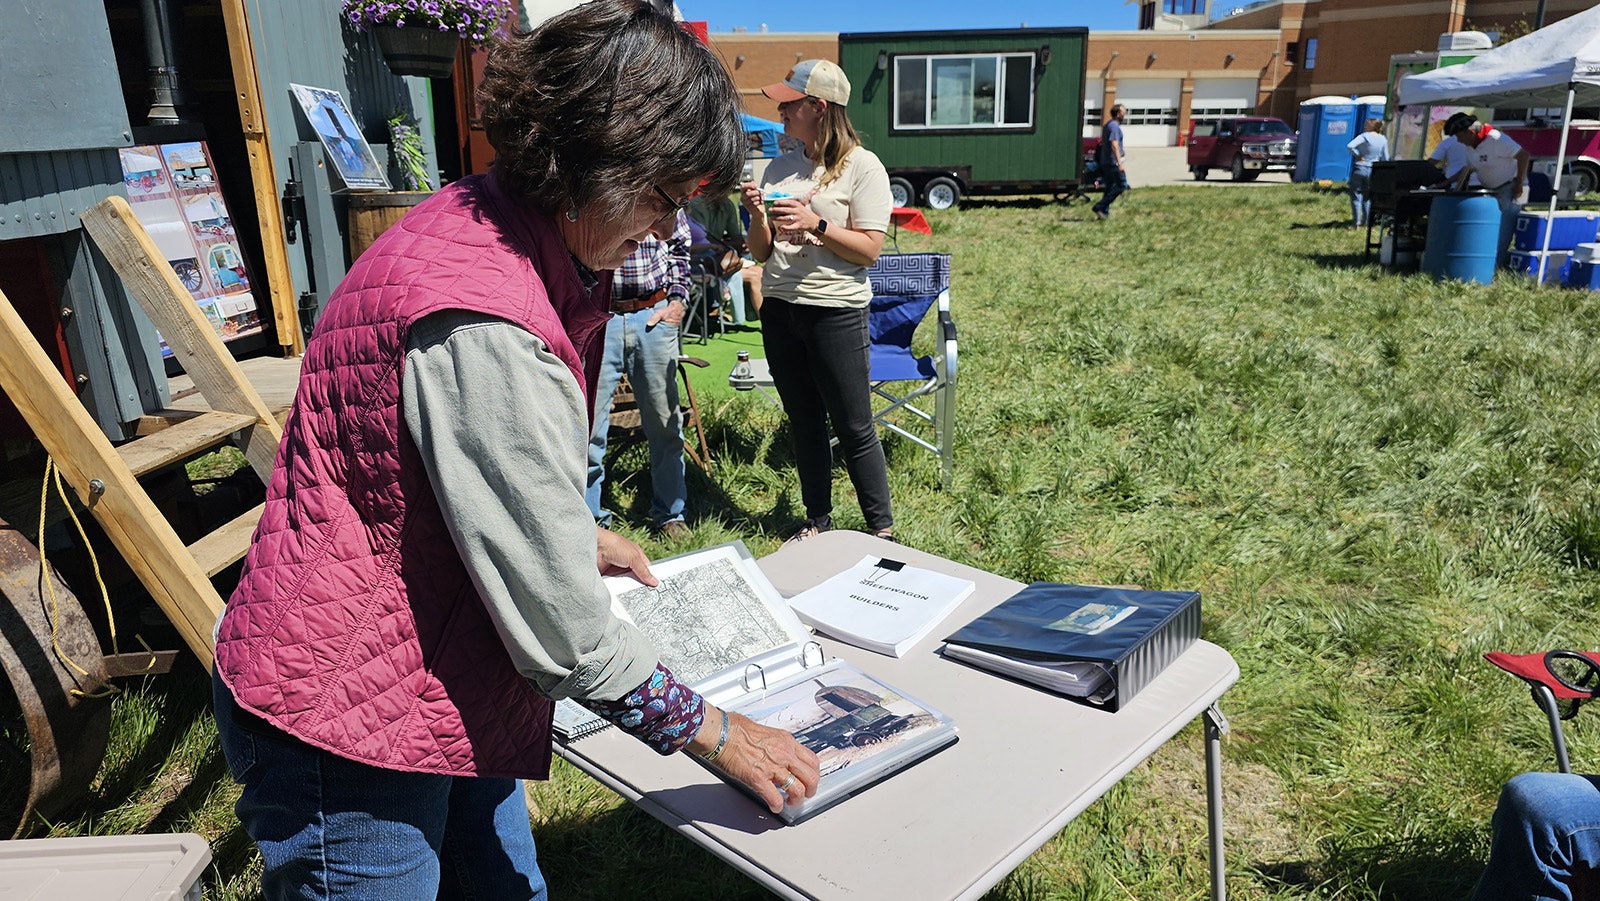 Lora O'Rourke looks through a scrapbook of sheep wagons she and her husband, the late Jim O'Rourke, have restored. Many of the wagons came from Wyoming. The wagons are going to become part of a museum on the O'Rourke's RUJODEN Ranch in Nebraska, two hours from Lusk, Wyoming.